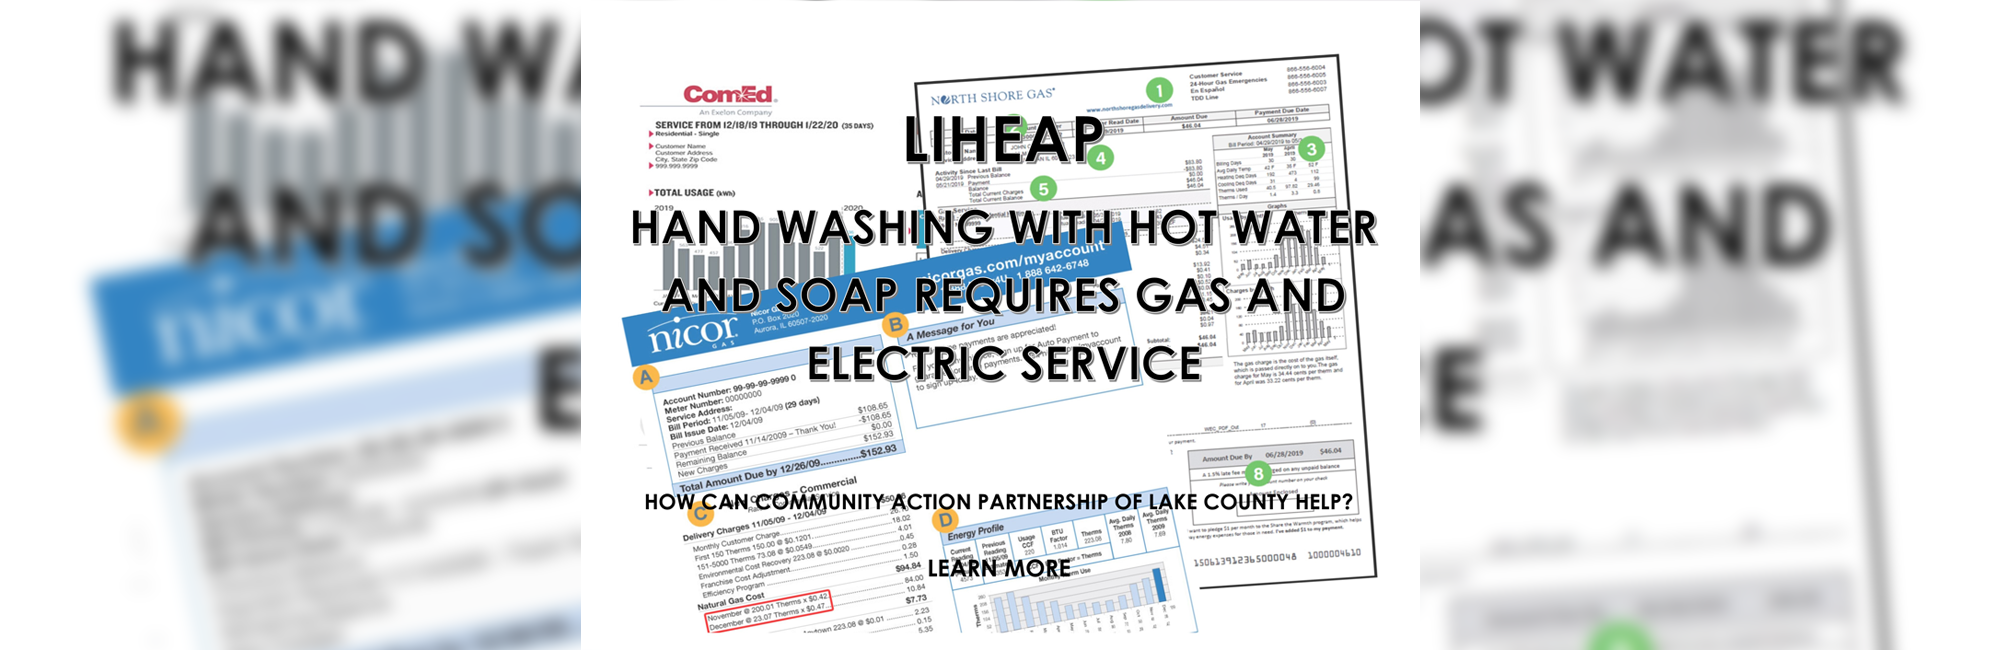 Hand Washing with Hot Water and Soap Requires Gas and Electric Service